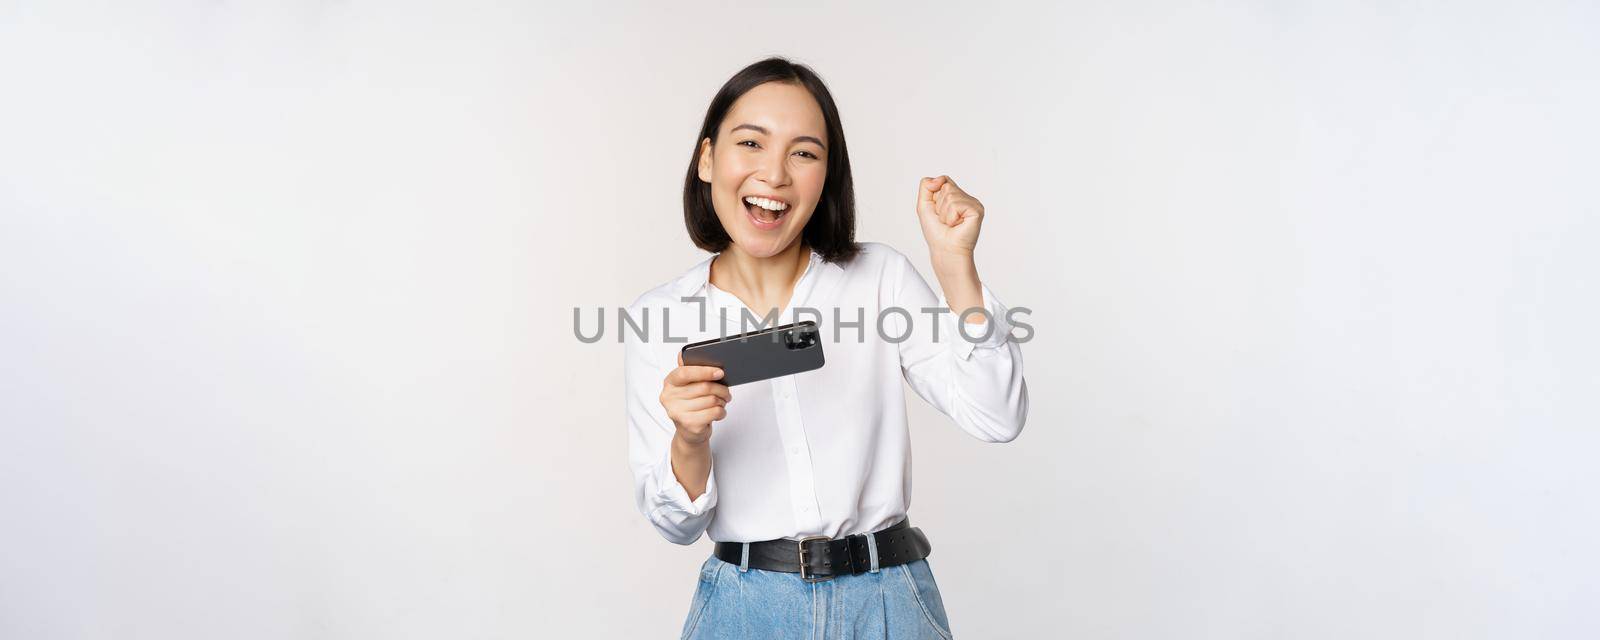 Happy asian woman do winner dance, triumphing, winning on mobile phone video game, holding smartphone horizontal position and celebrating, white background.